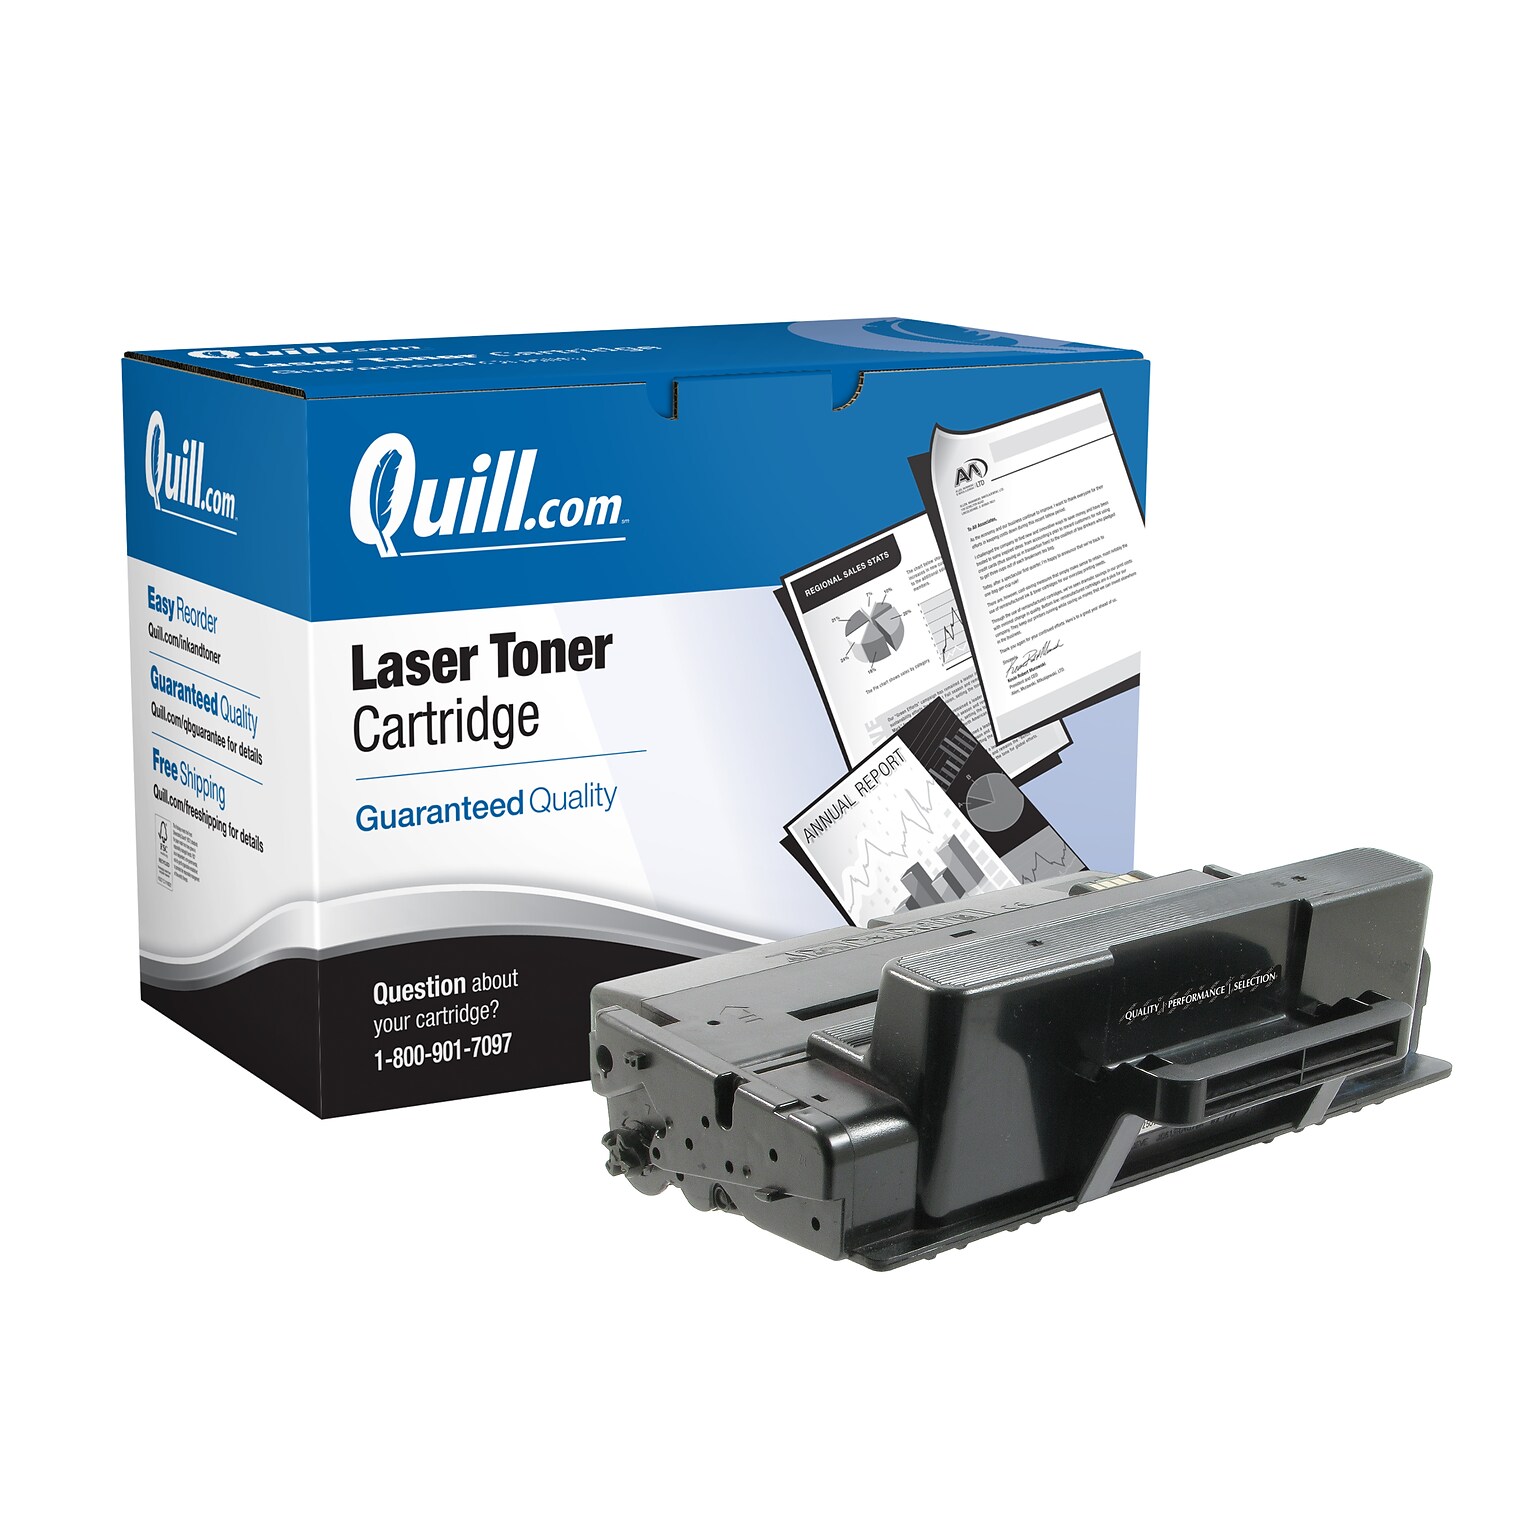 Quill Brand® Remanufactured Black High Yield Toner Cartridge Replacement for Samsung MLT-205 (MLT-D205L/MLT-D205S)